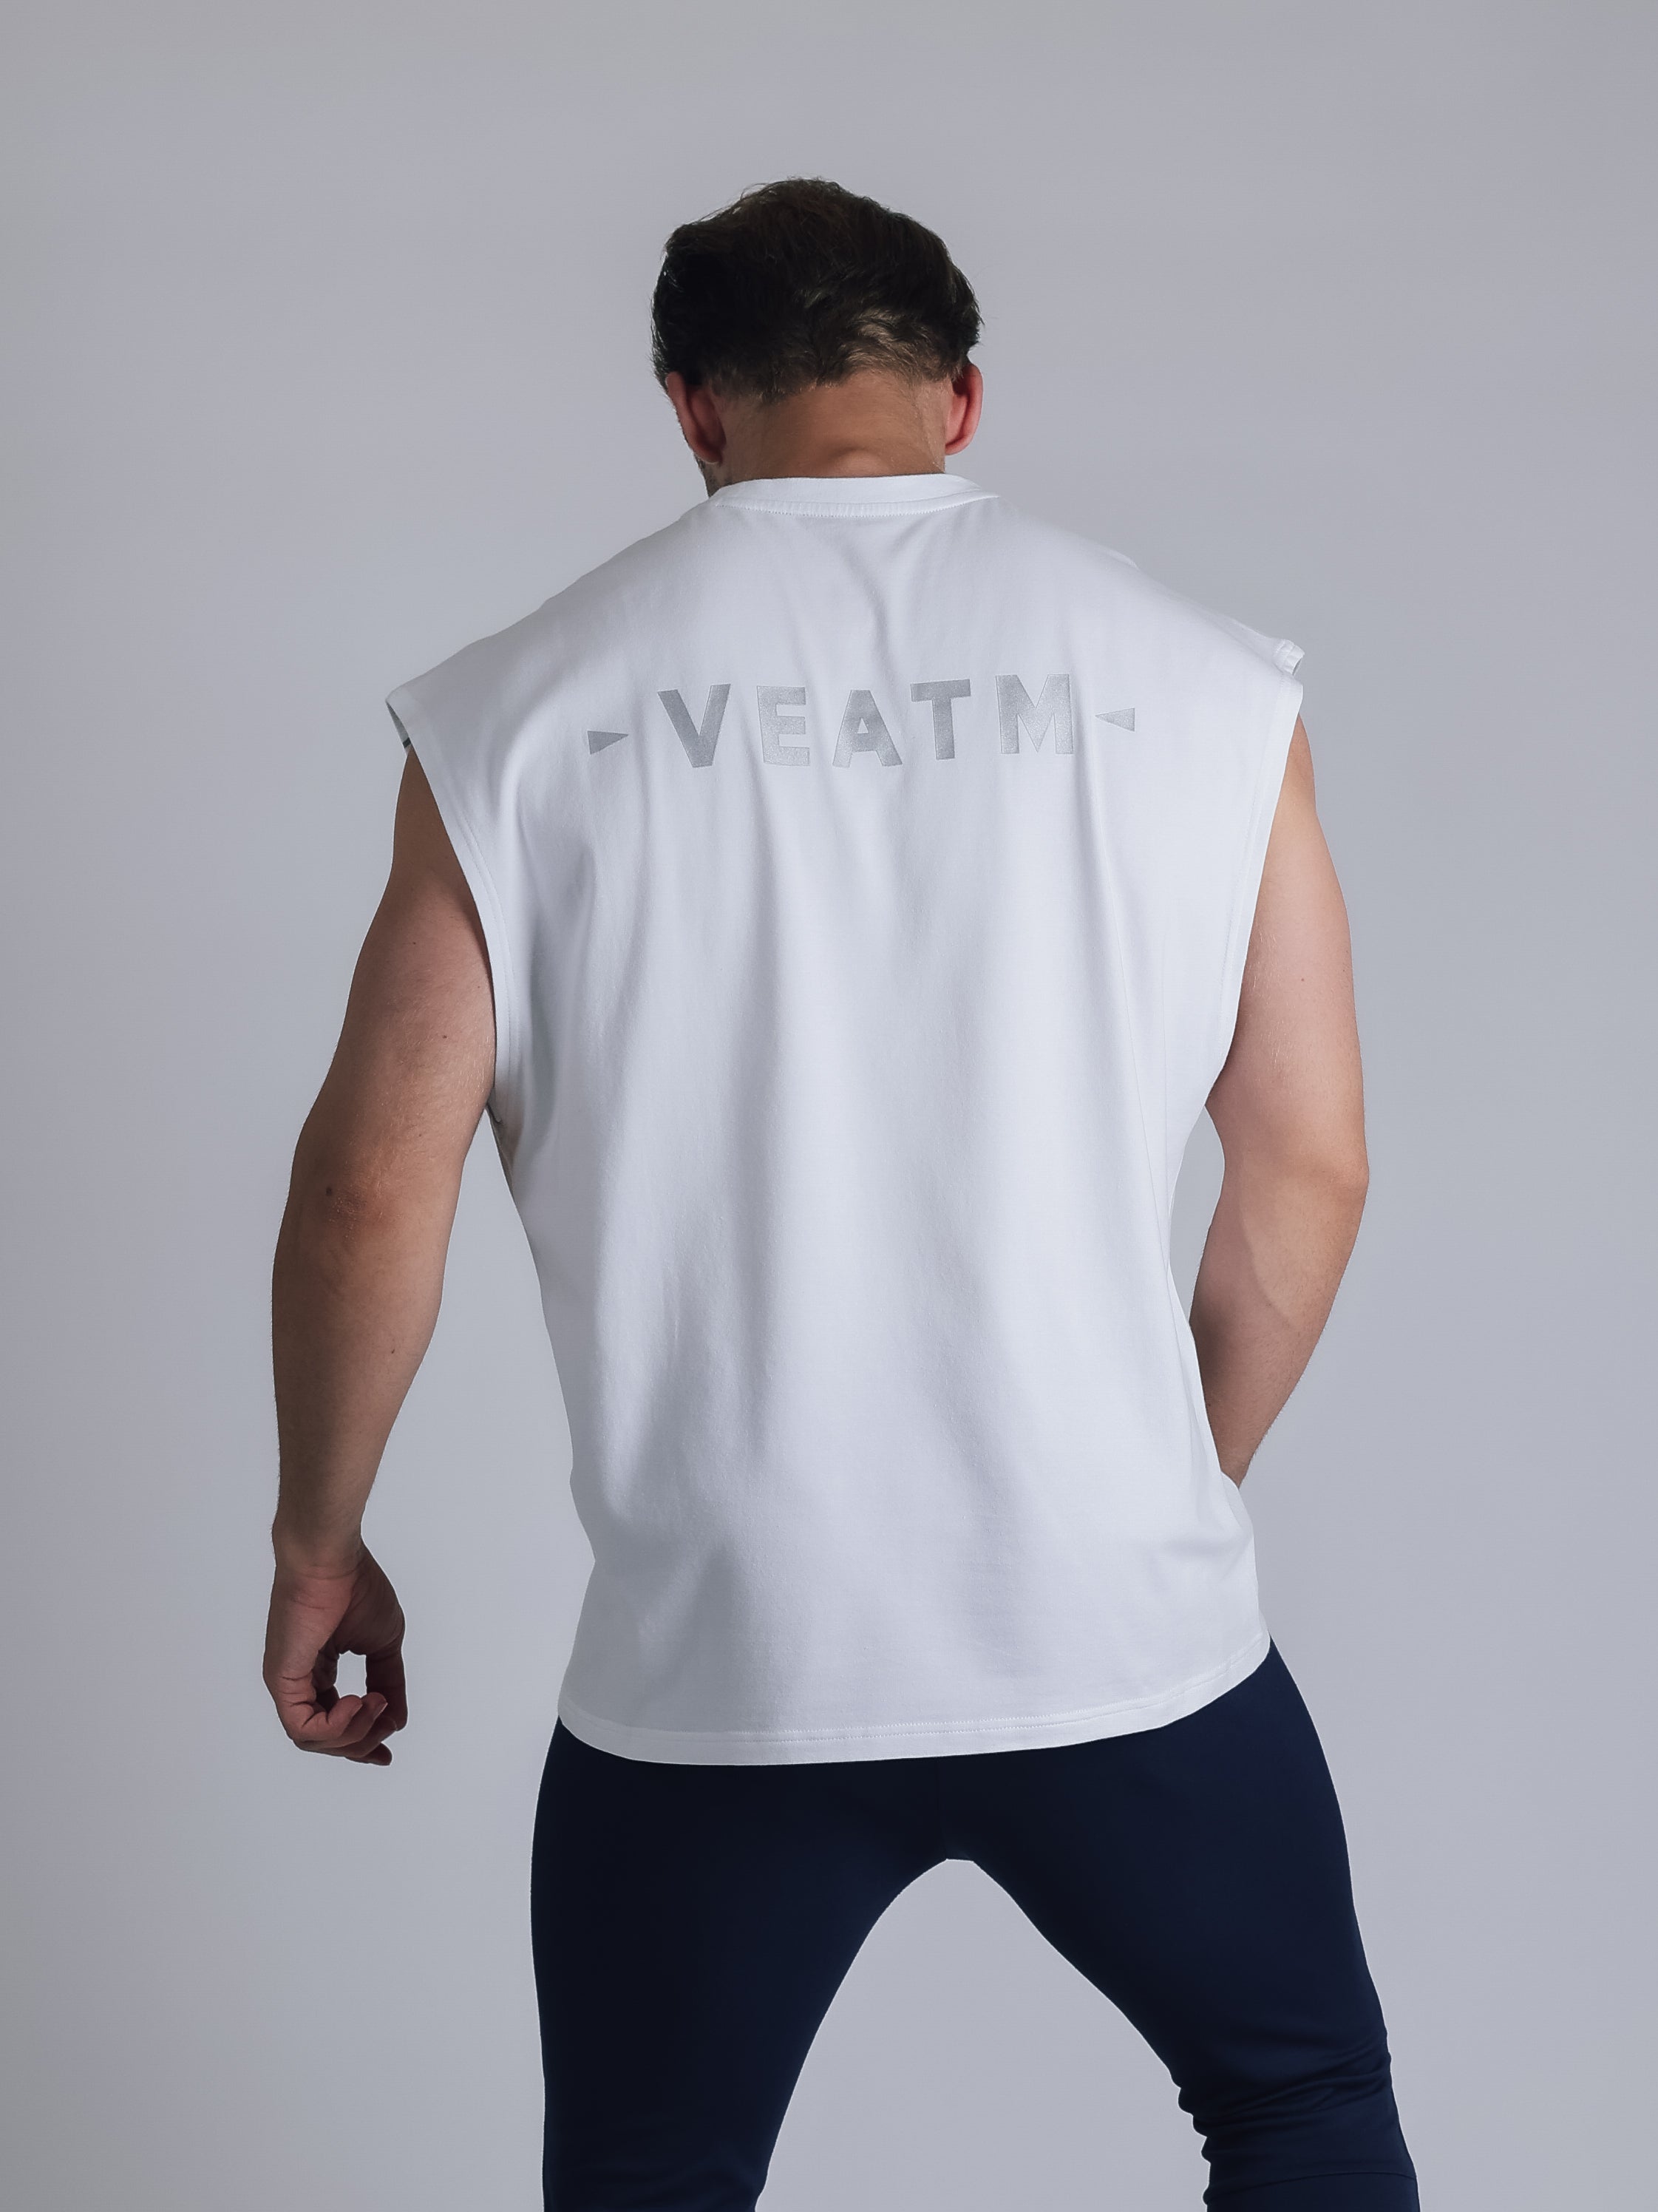 NO SLEEVE TOPS【OFFWHITE】 | VEATM 公式ショッピングサイト